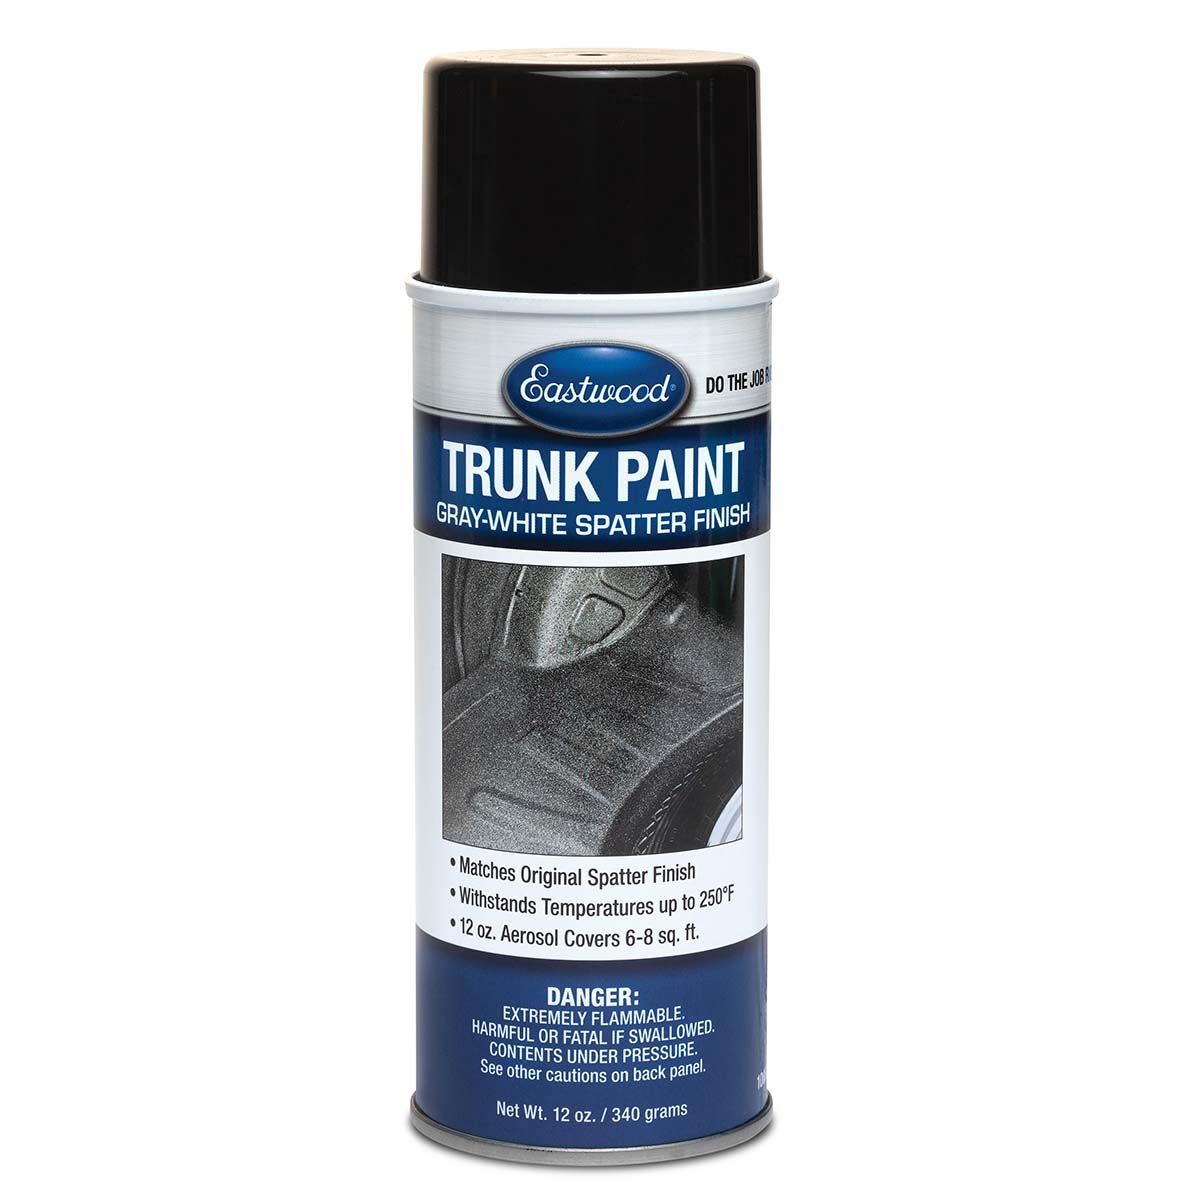 Eastwood Trunk Paint Gray/White Spatter Finish